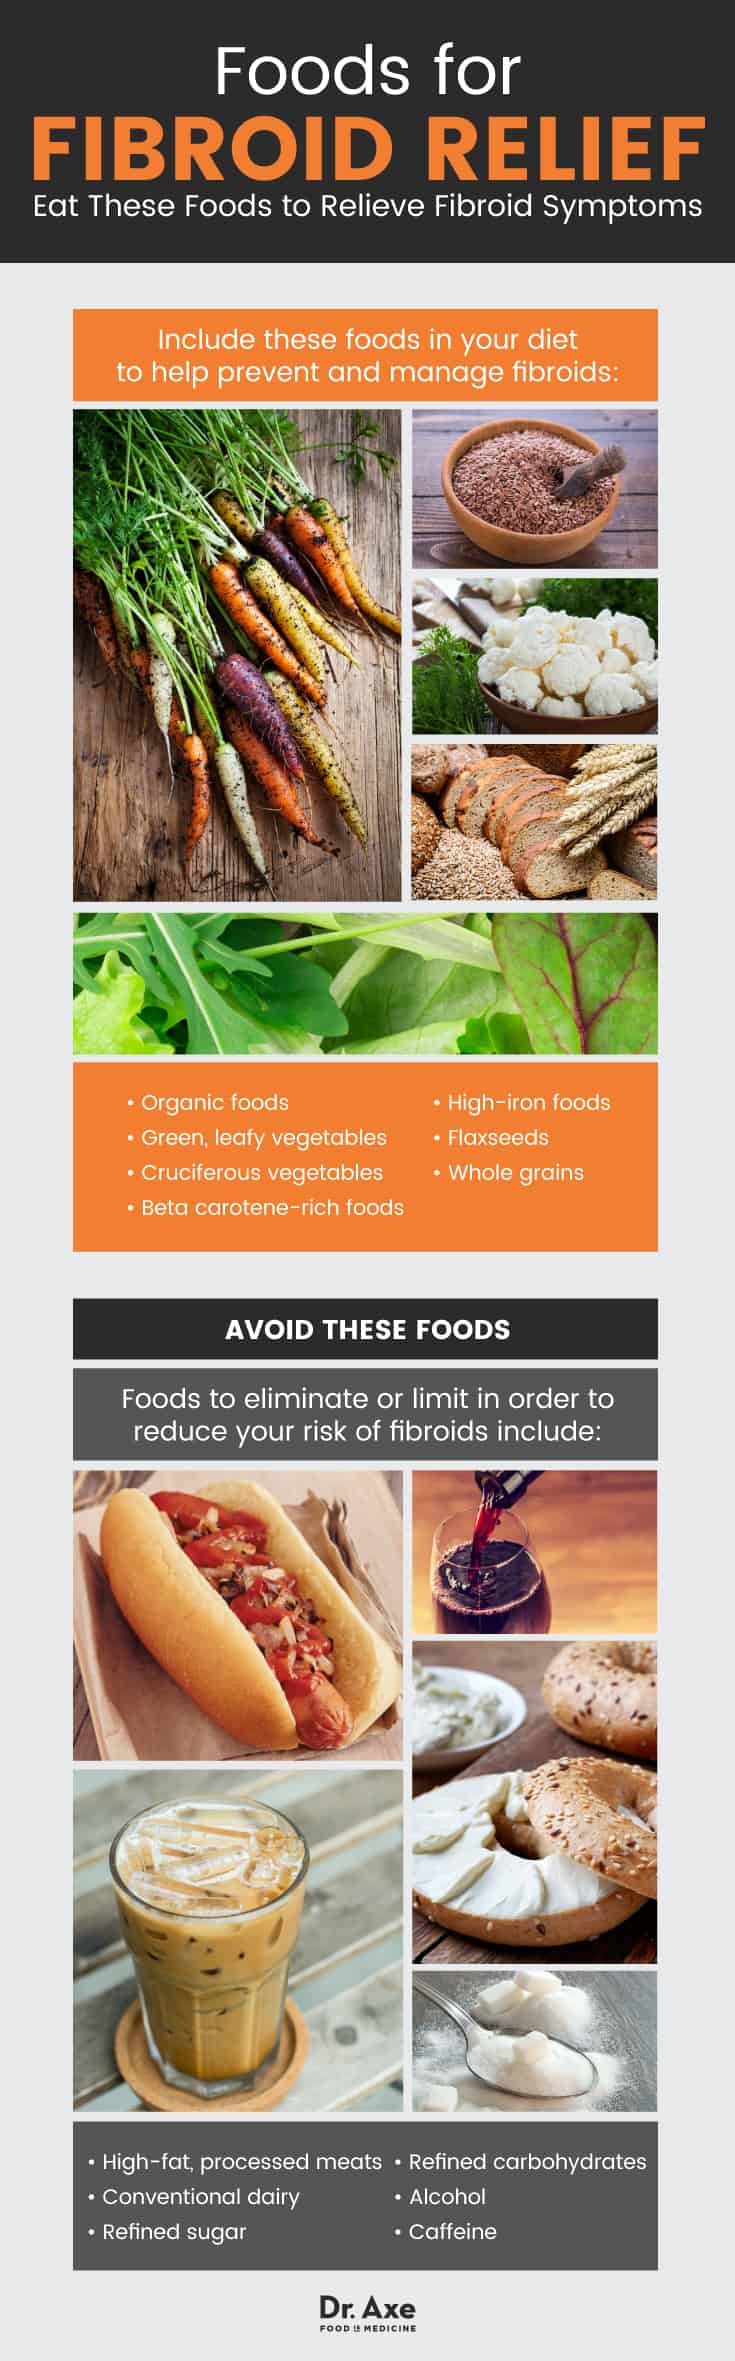 Foods for fibroids relief - Dr. Axe